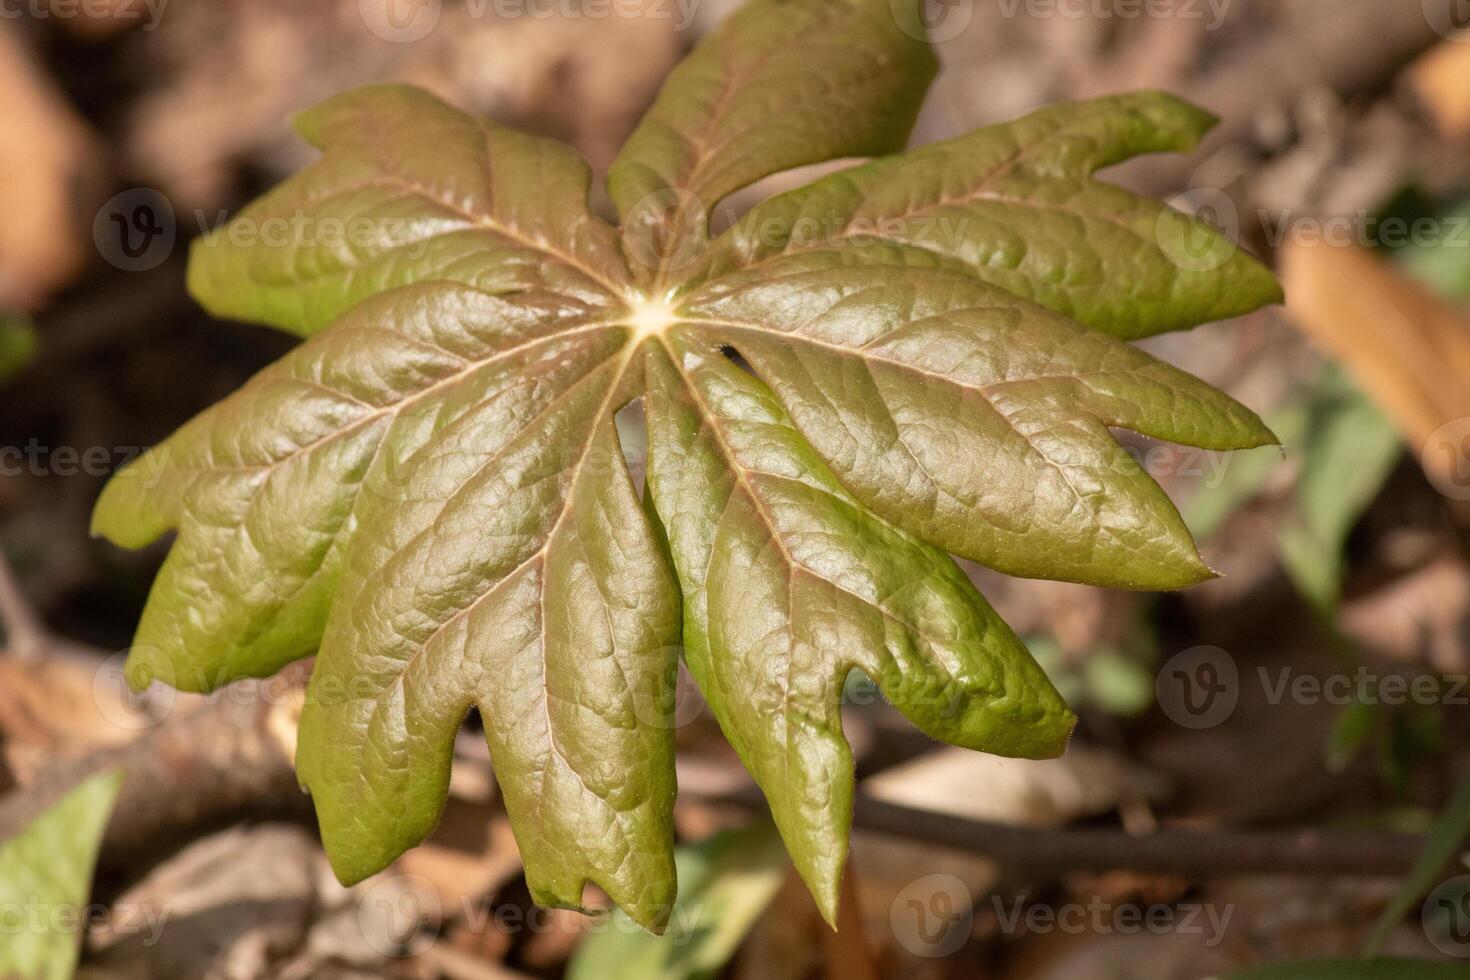 This may apple plant is sitting in the wooded area around brown leaves. This plant is given the name since they normally are seen in May and grow apple looking fruit. I love the large green leaves. photo